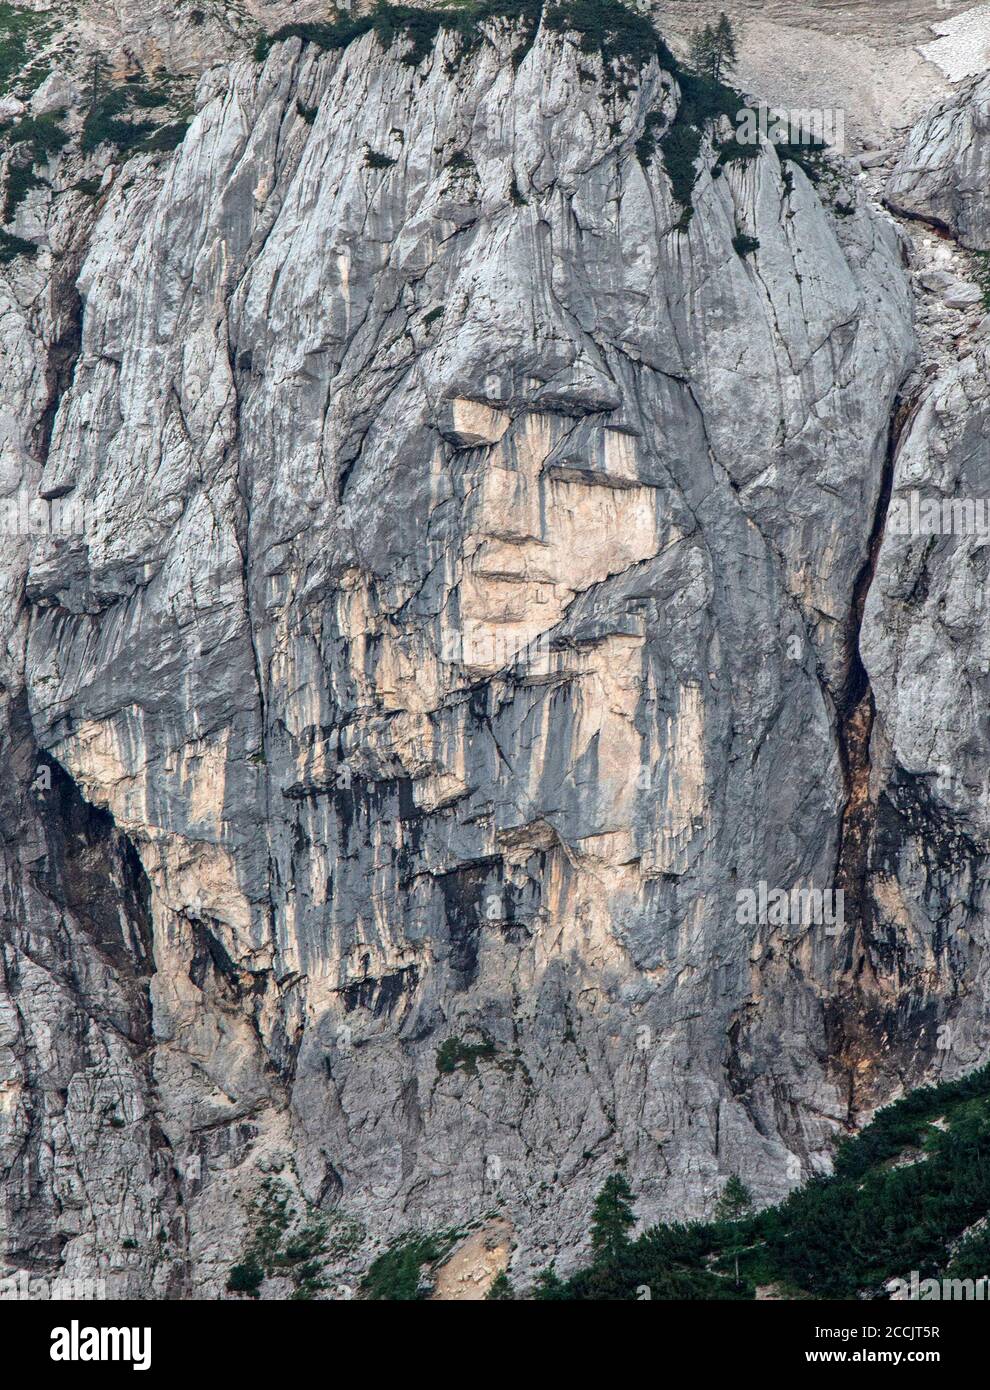 The Adjovska Deklica, or Girl In The Rock, a natural rock formation on the side of Mount Prisank in Slovenia. Stock Photo